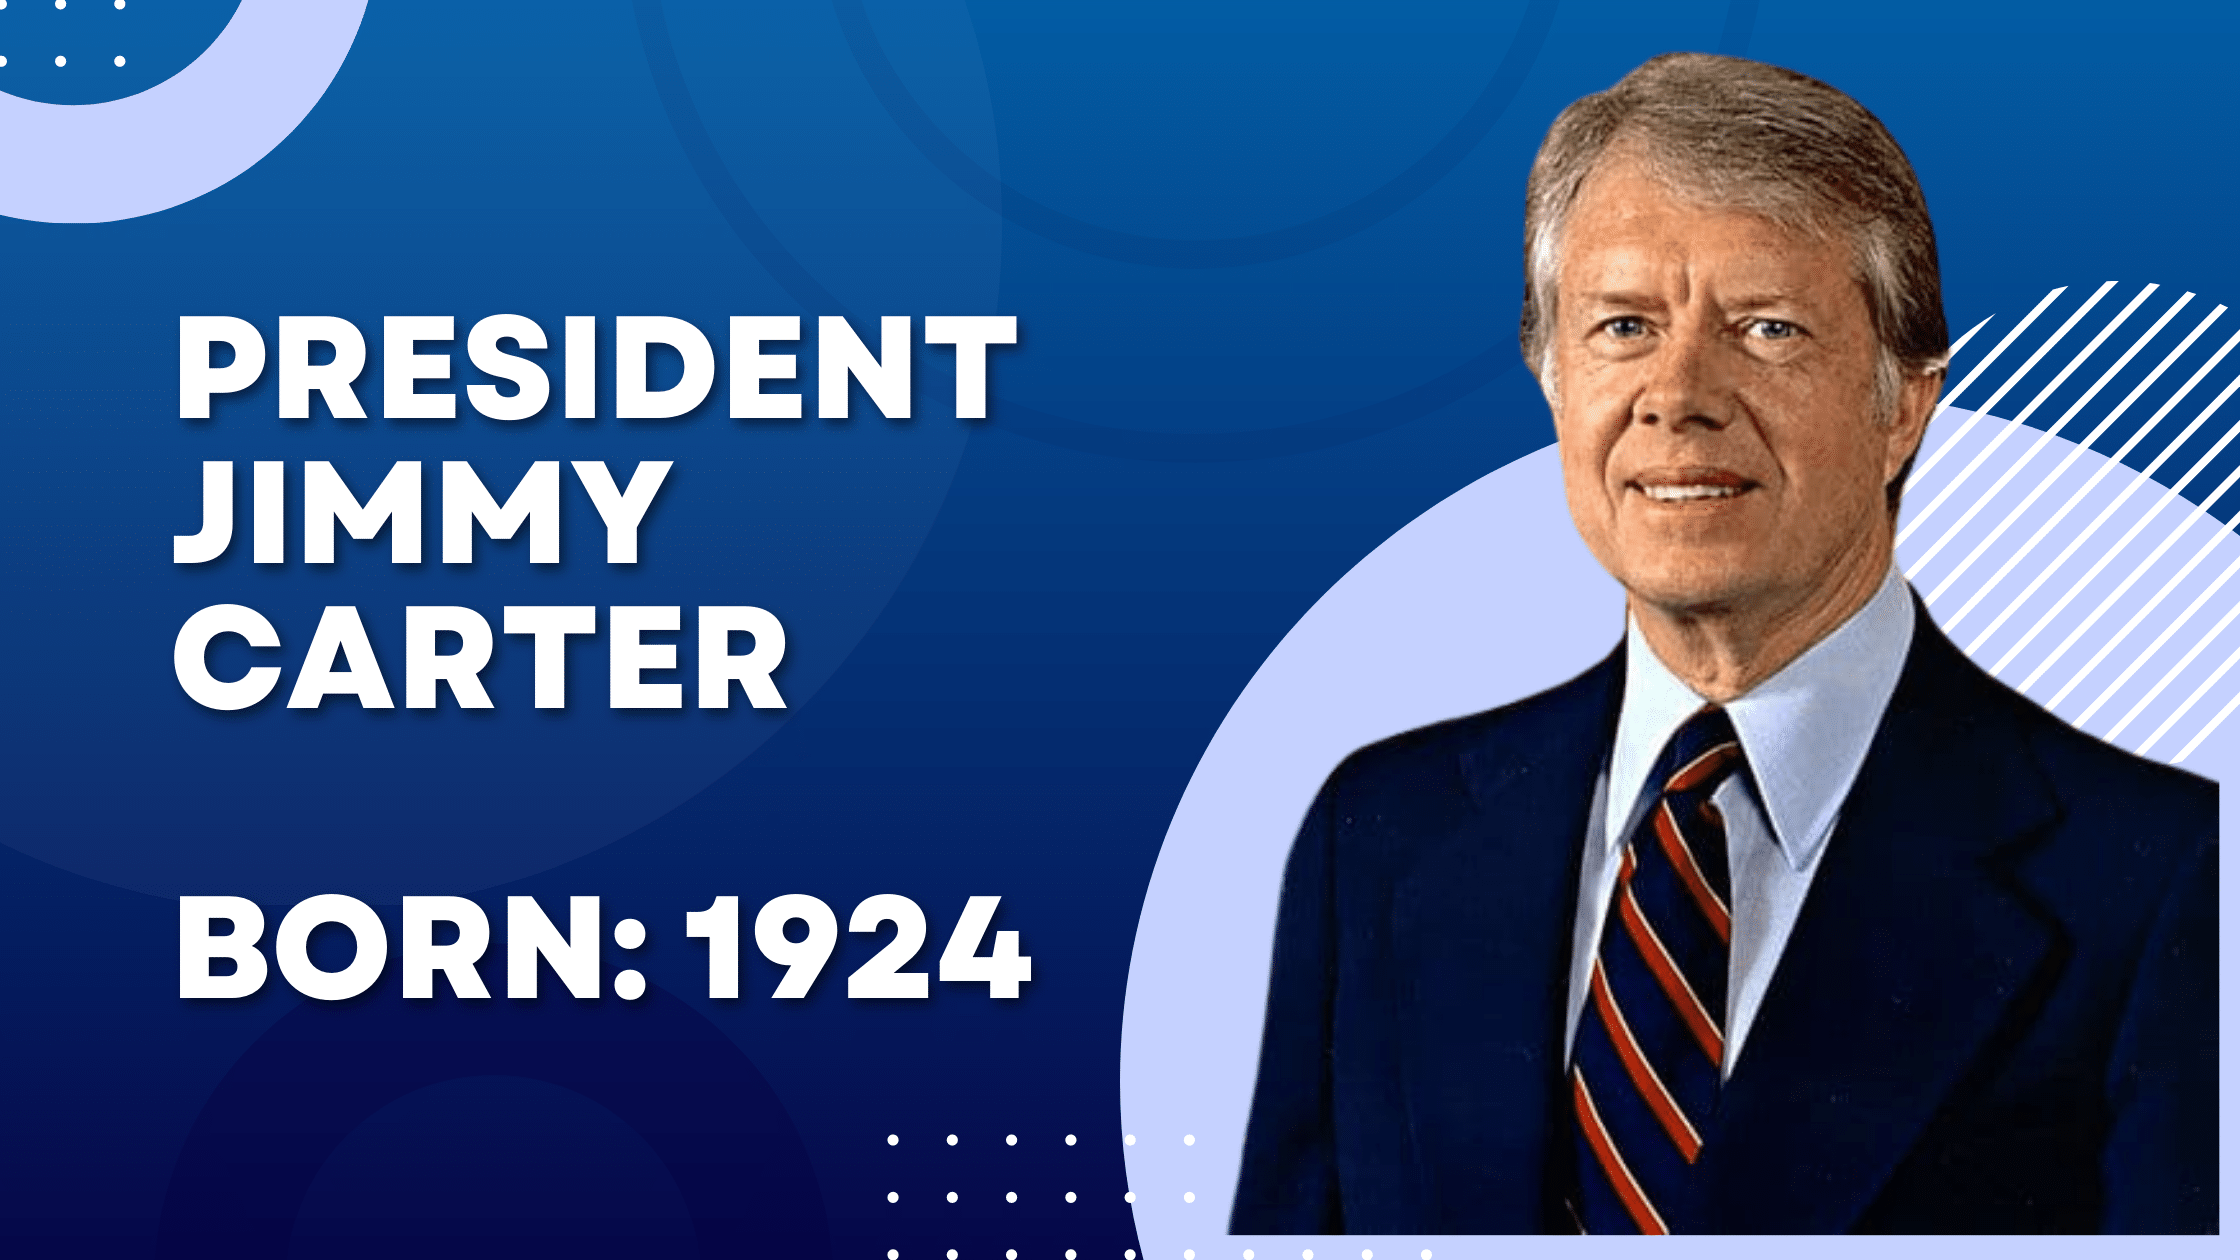 President Jimmy Carter, born in 1924, serves as the main focus of this description.